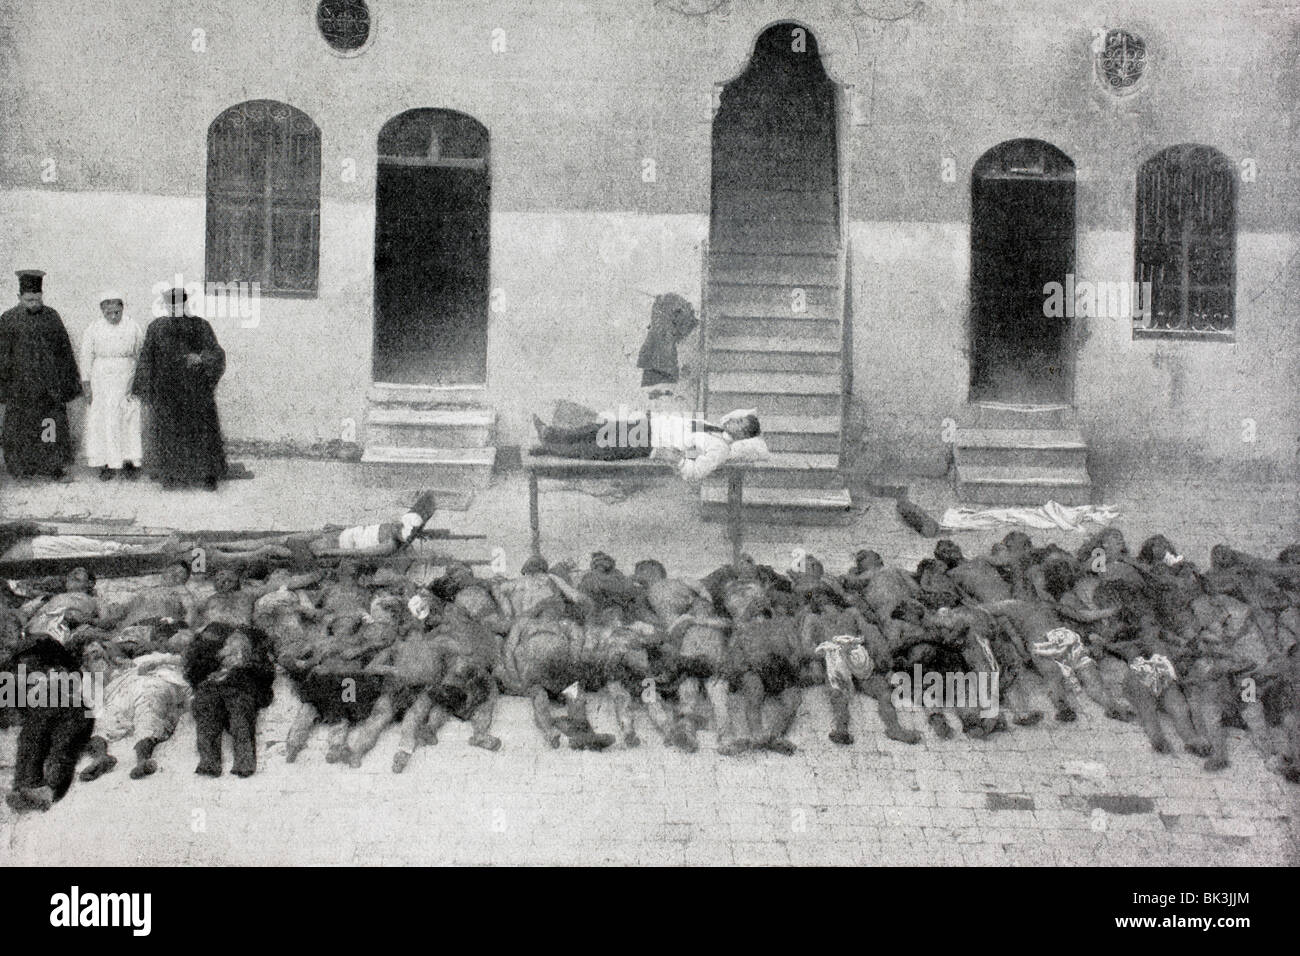 Bodies of Armenians massacred on February 28, 1919 in Aleppo, Syria, laid out in front of Armenian Relief Hospital. Stock Photo